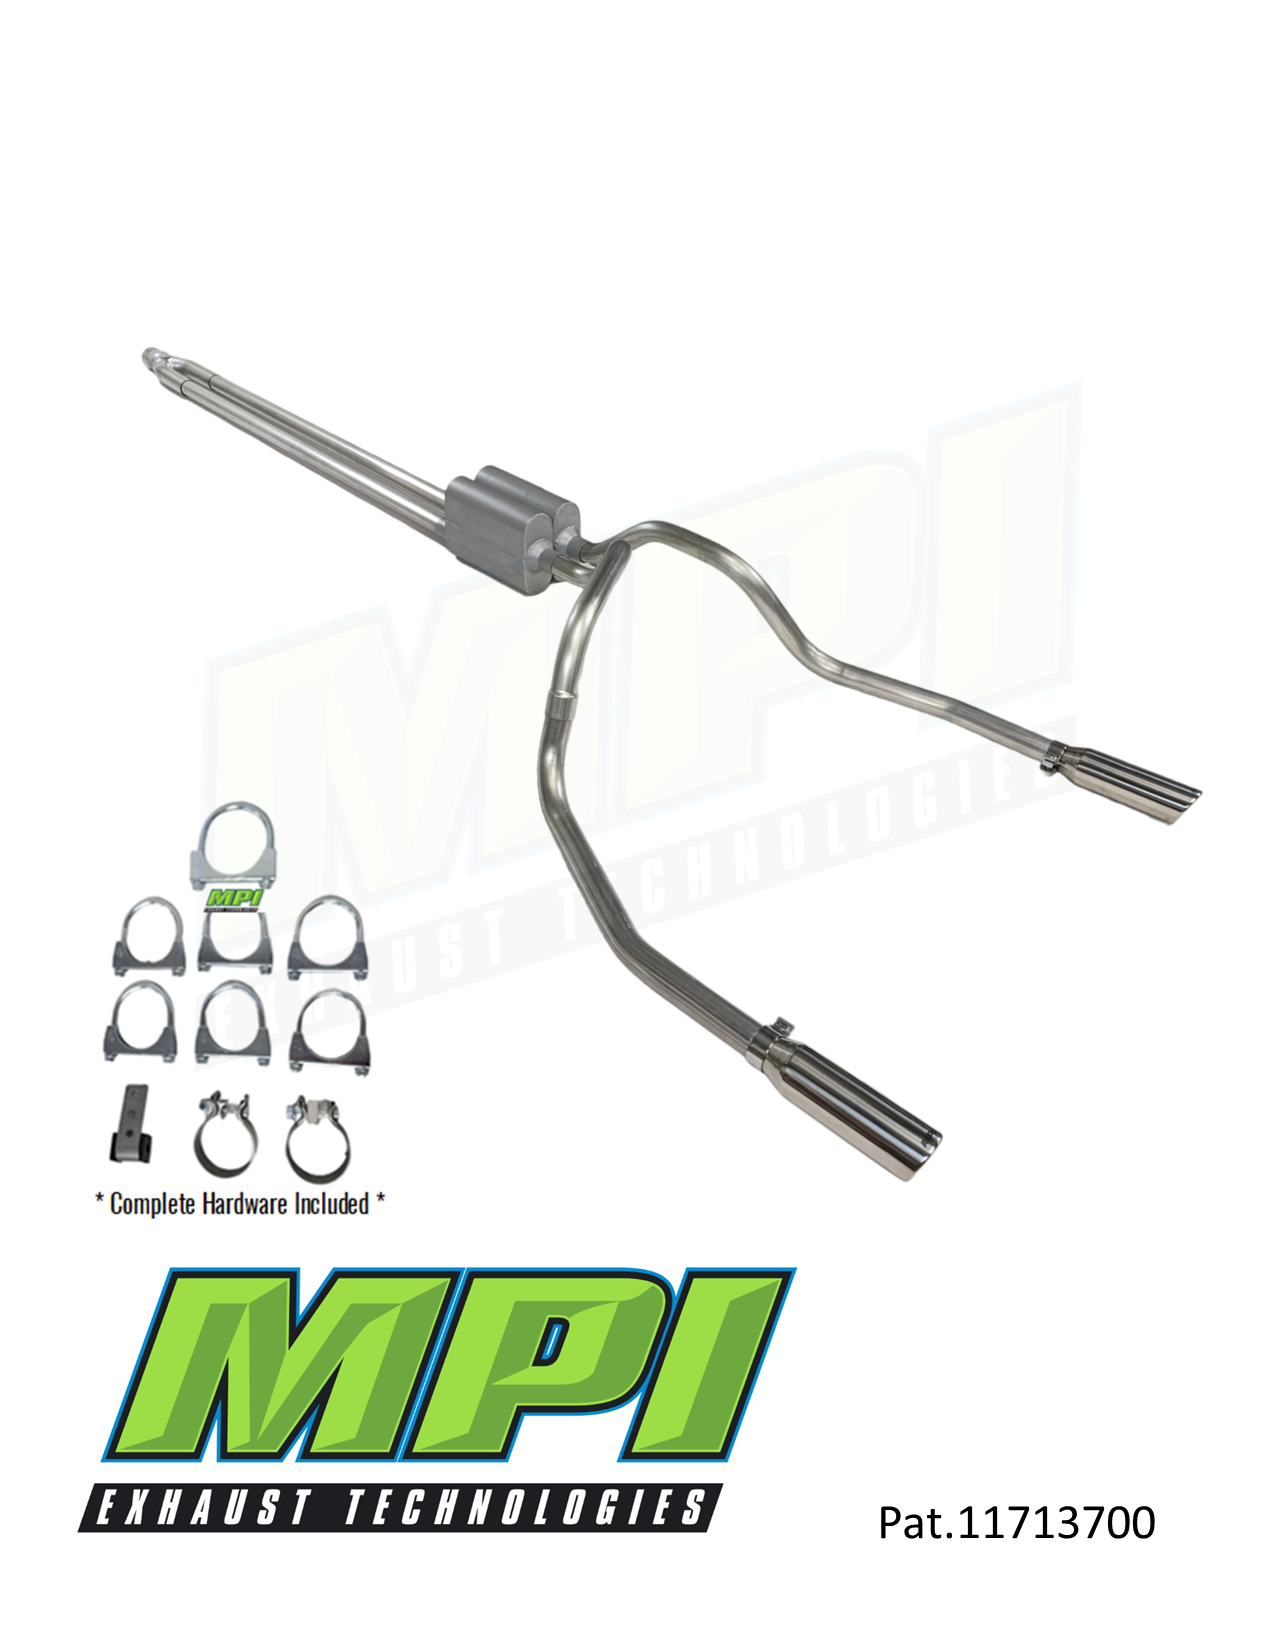 GM 5.3L 2014-2018 Truck Dual Exhaust Kits - Clamp-on